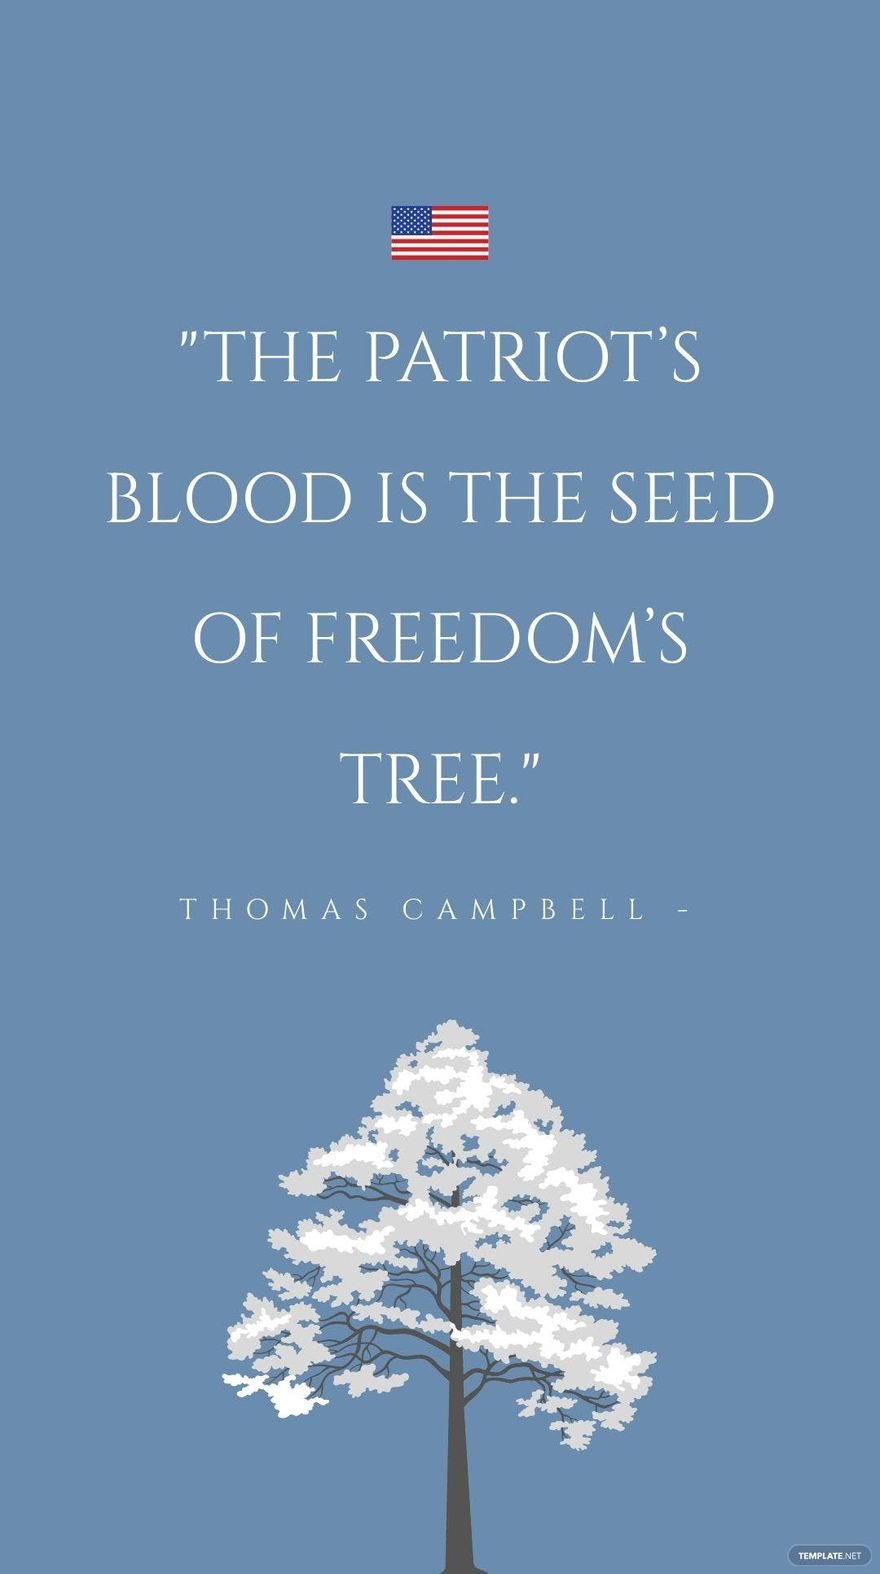 Thomas Campbell - The patriot’s blood is the seed of freedom’s tree. in JPG